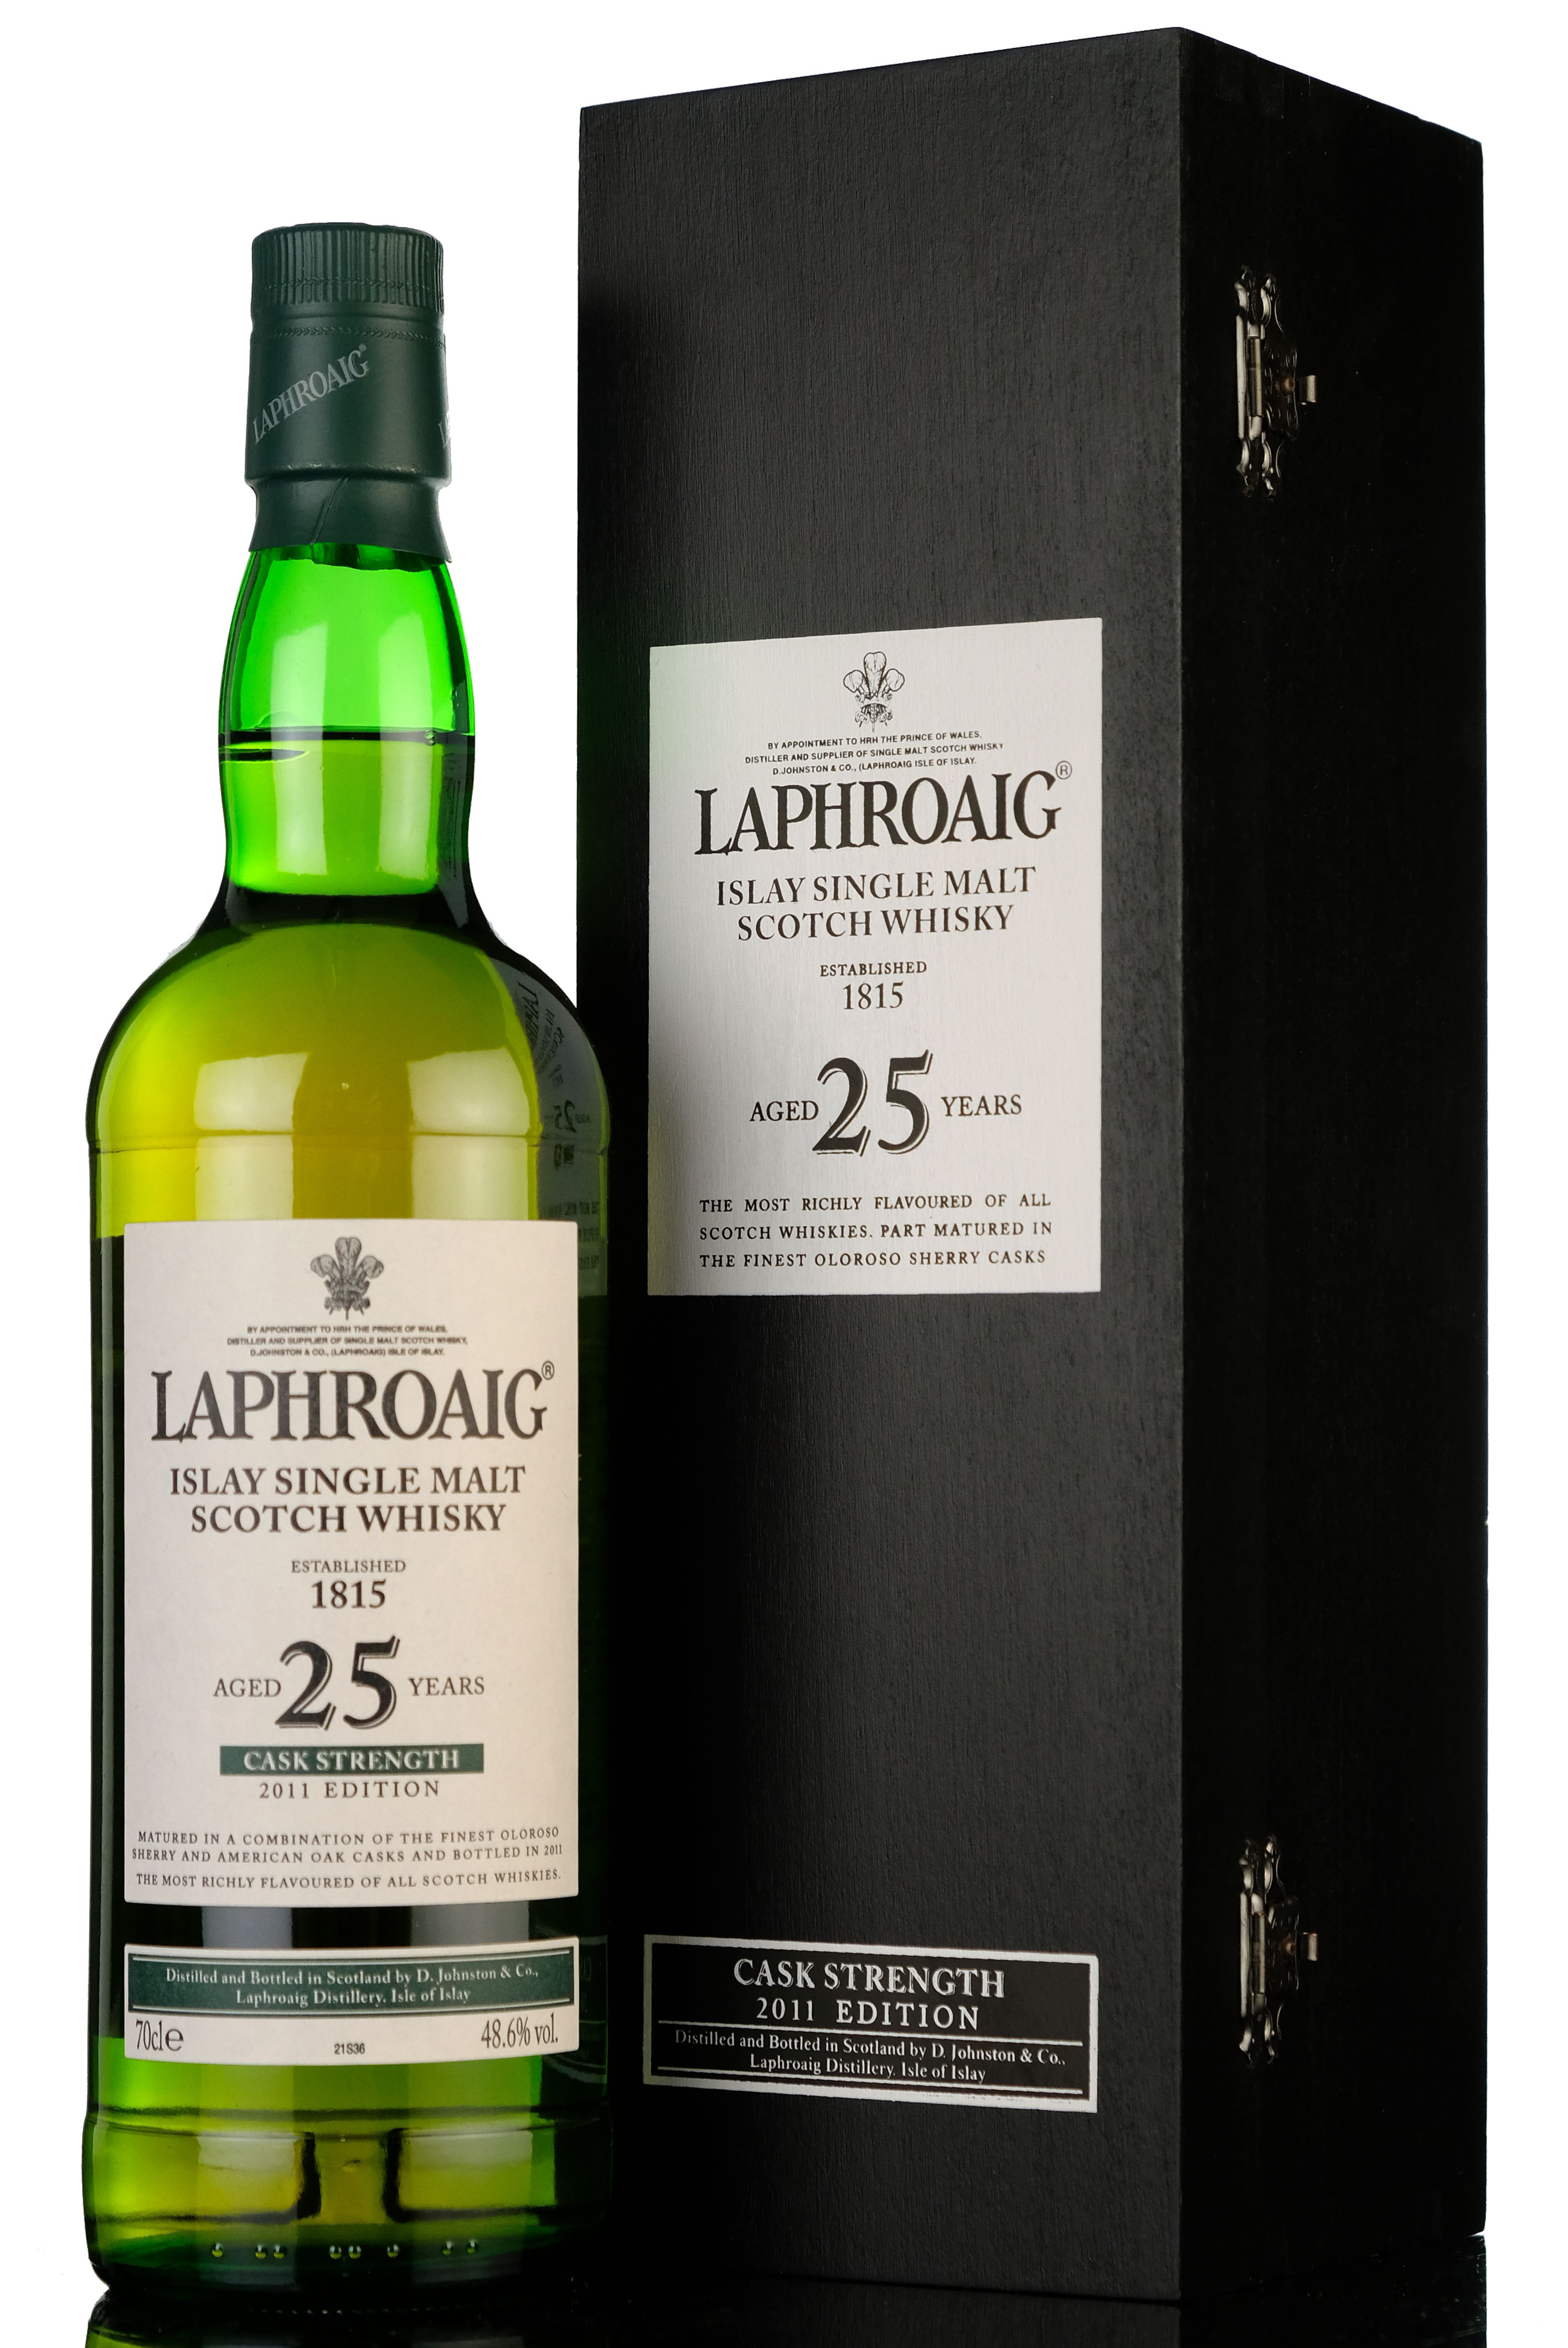 Laphroaig 25 Year Old - Cask Strength - 2011 Edition